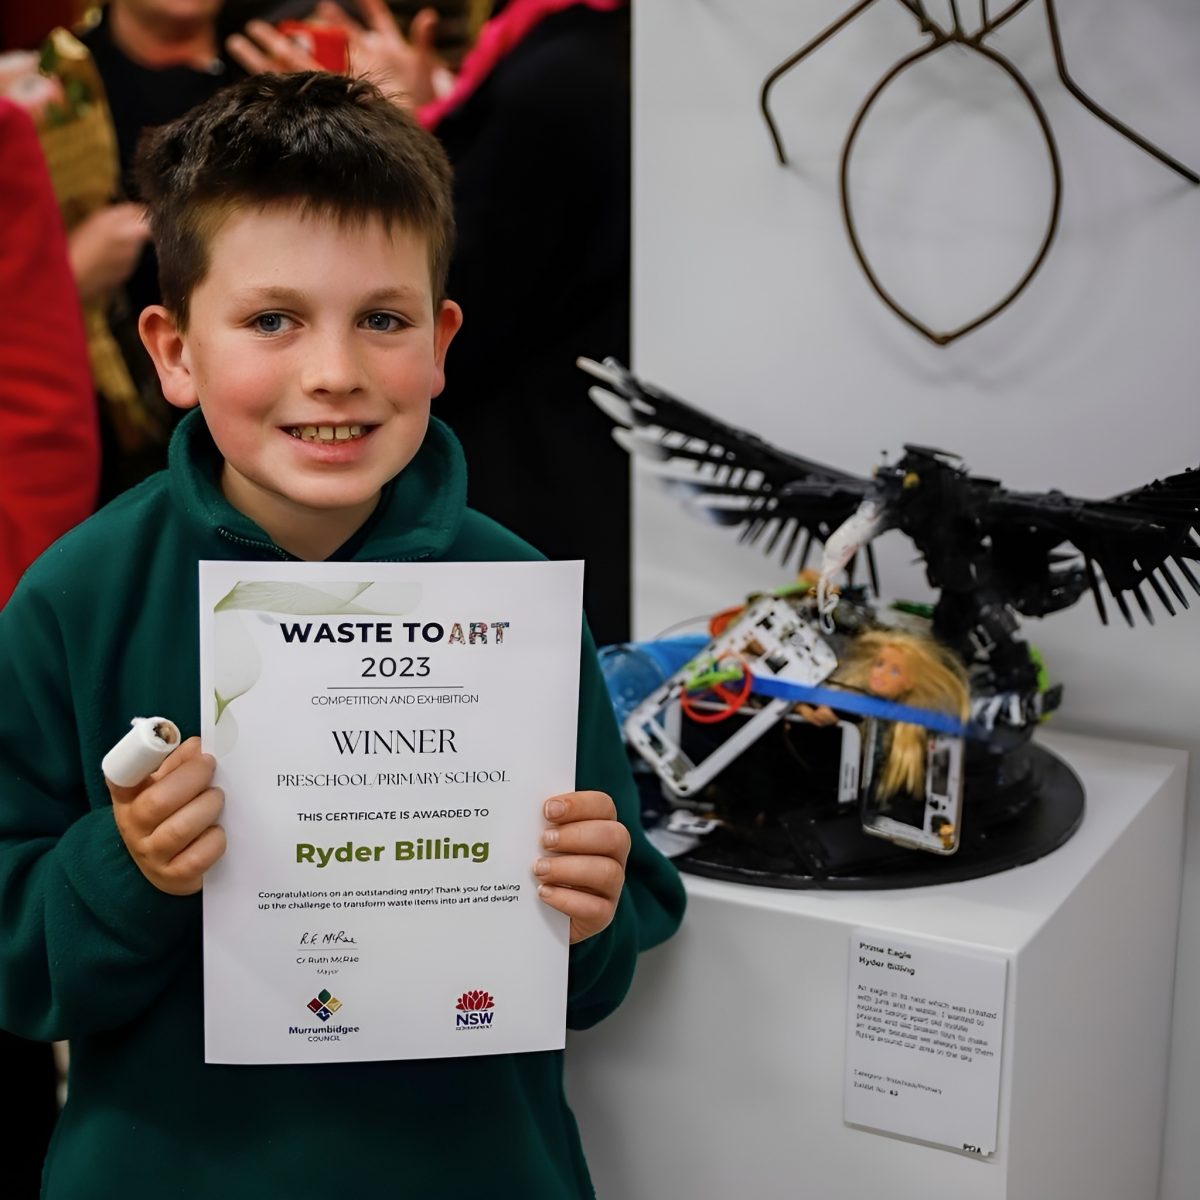 A boy with his art and award certificate